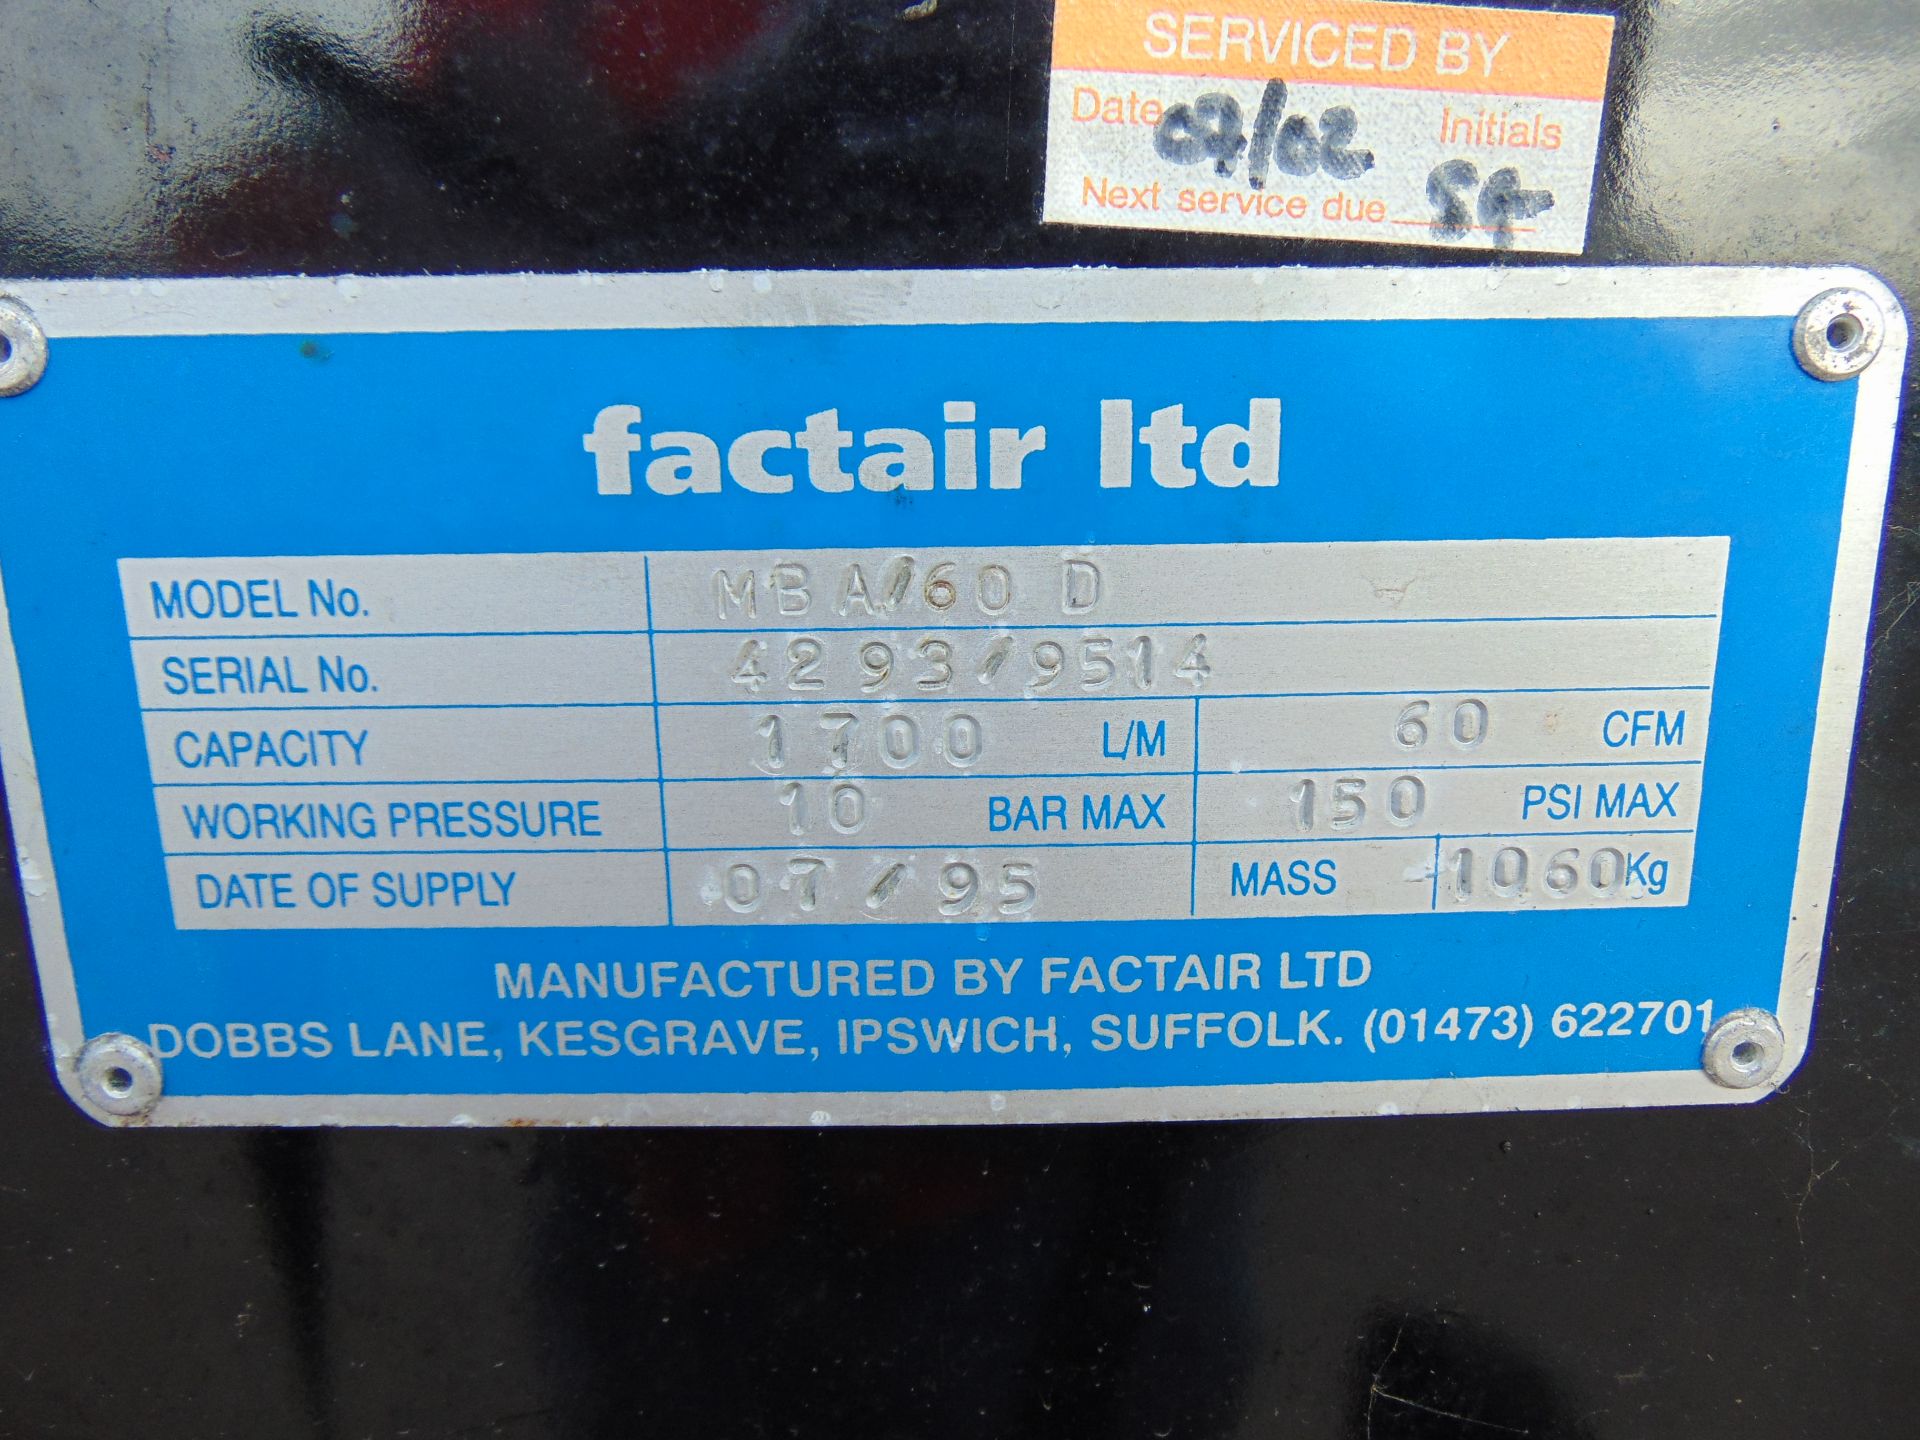 Factair BA60D Mobile Breathing-Air Compressor - Image 18 of 19